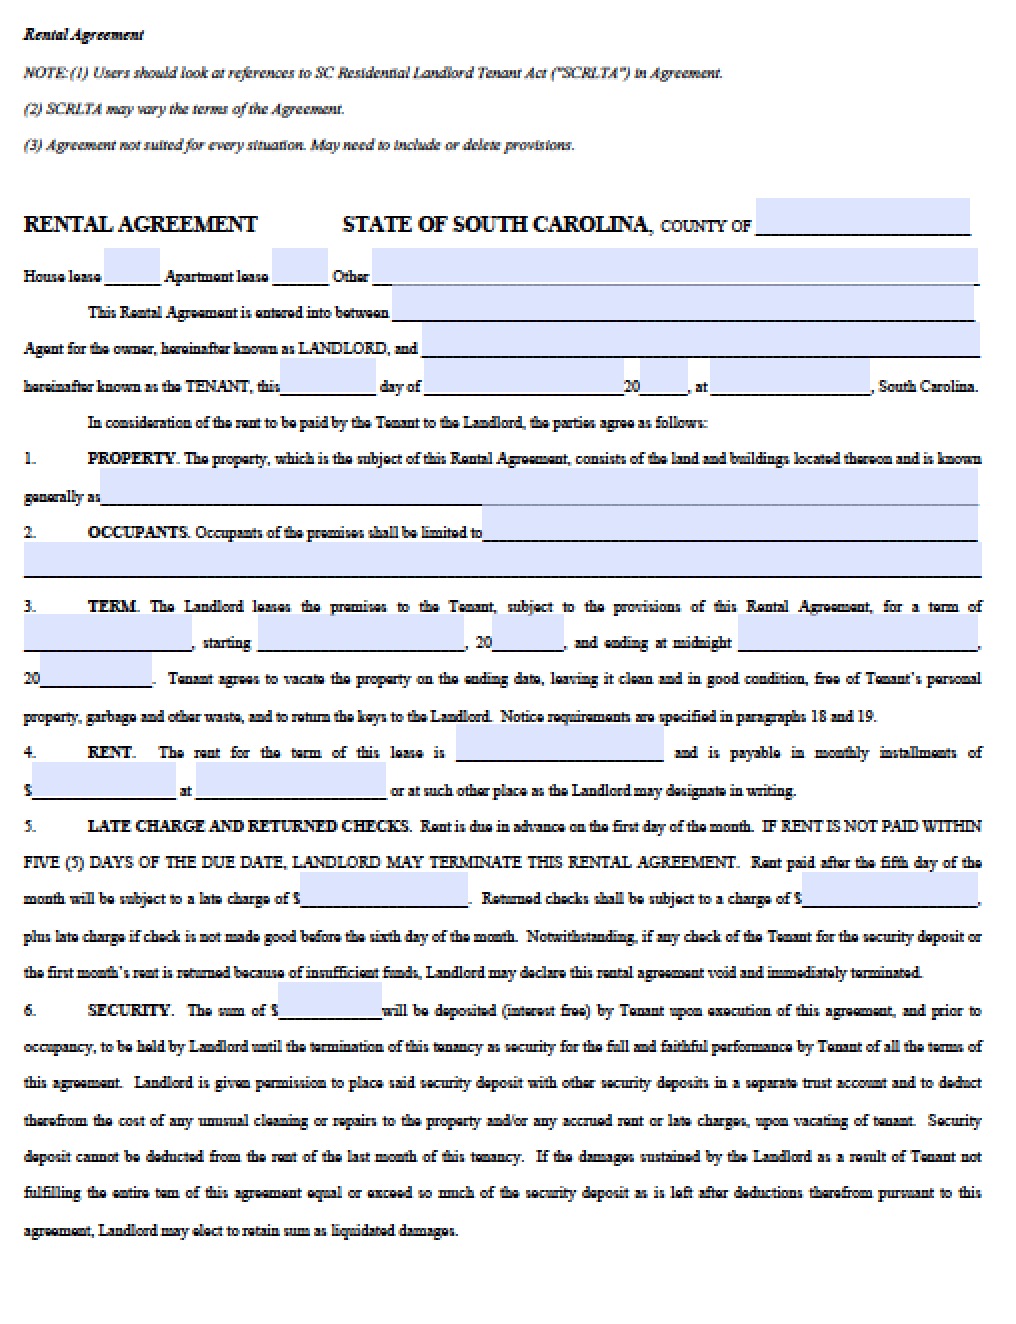 free-south-carolina-standard-residential-lease-agreement-template-pdf